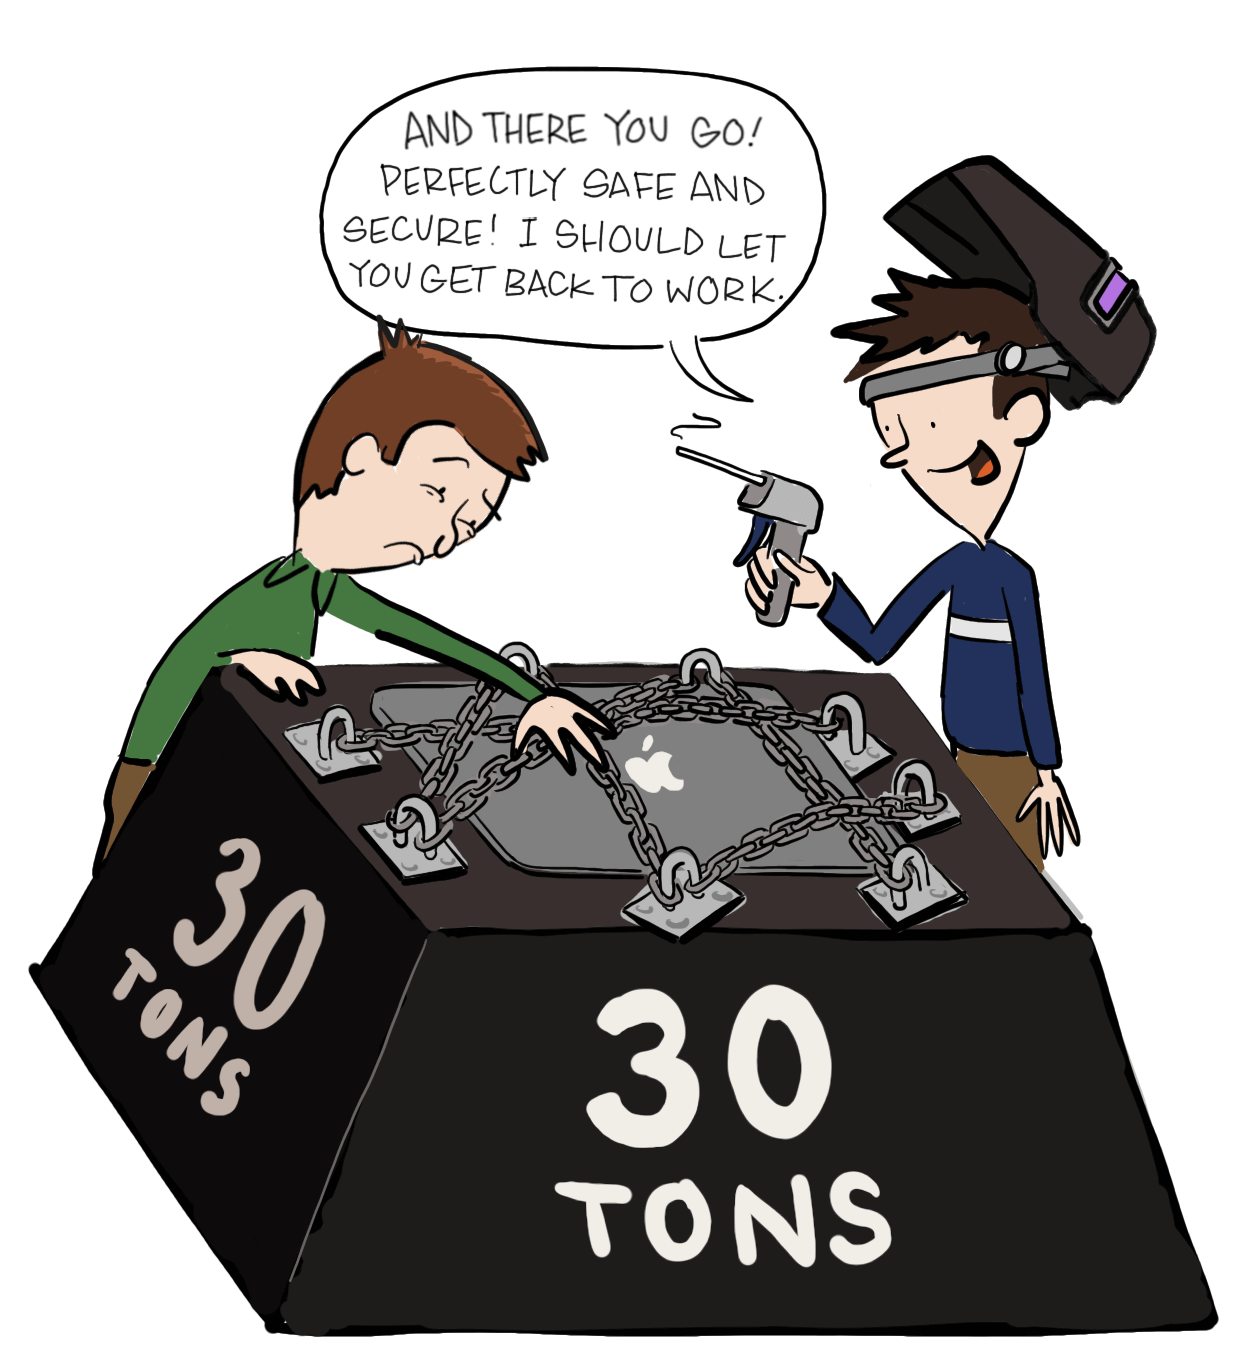 a comic showing two people, one with his laptop chained to a weight that reads "30 tons" the other man is holding a welding tool and is saying "And there you go! perfectly safe and secure! I should let you get back to work.